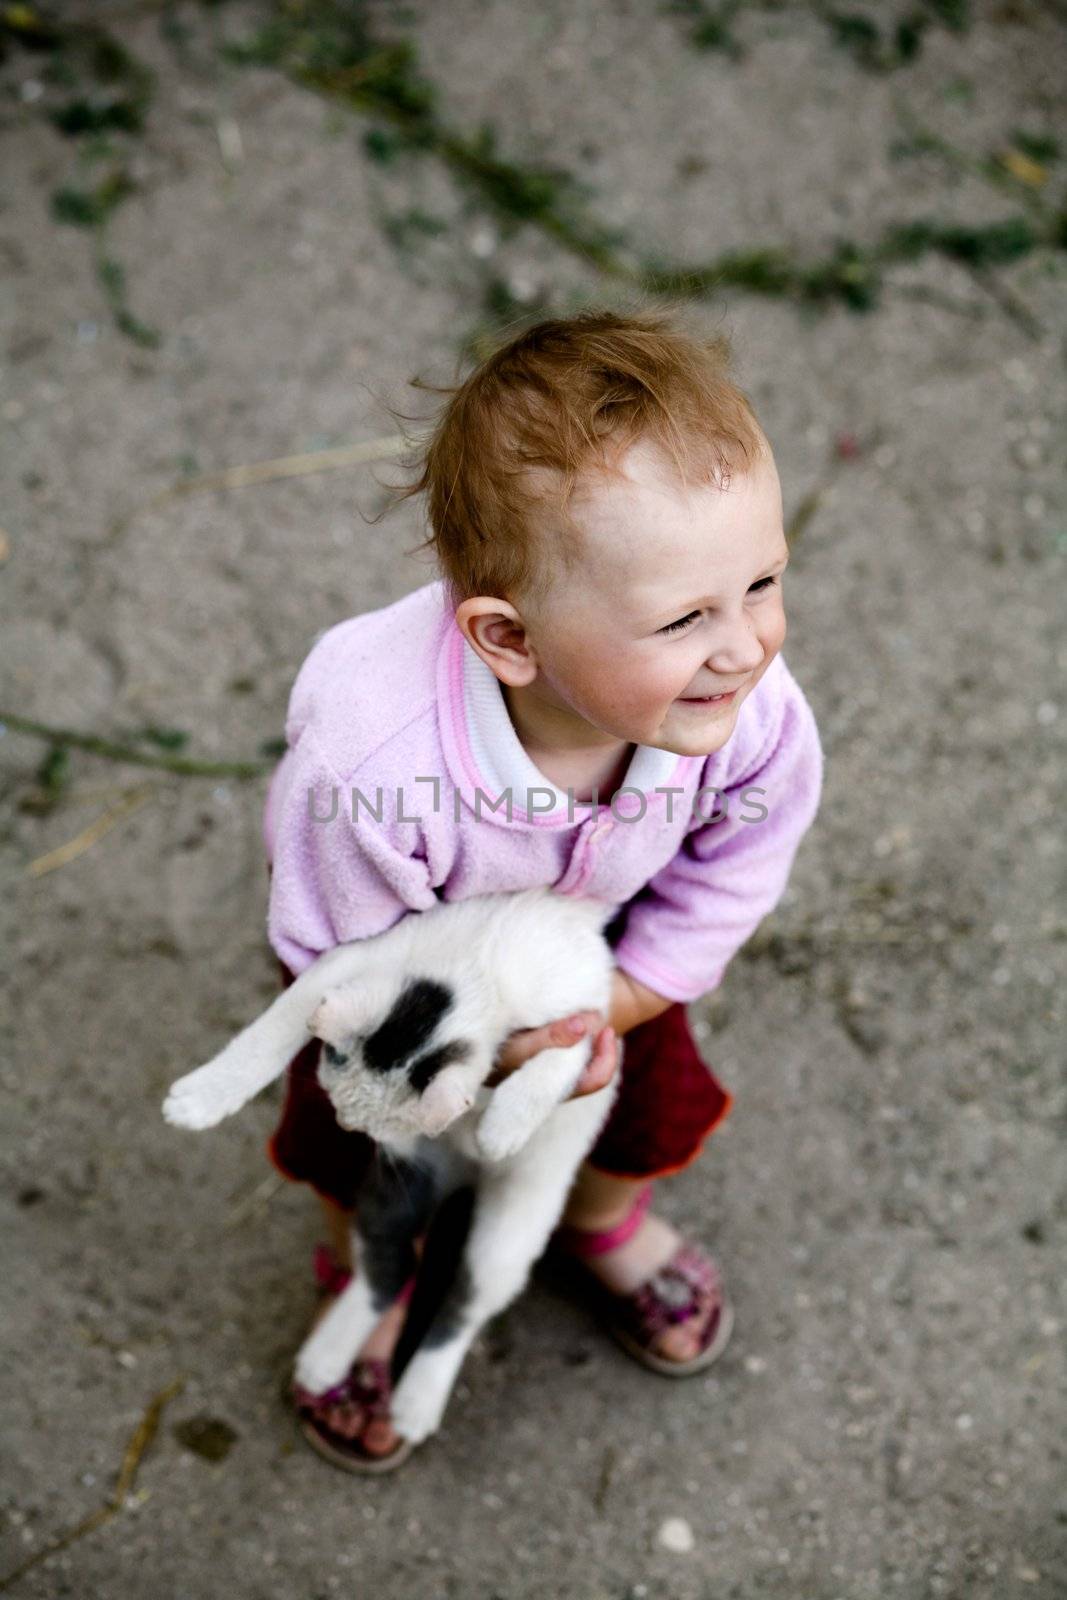 The happy baby with a cat in her arms